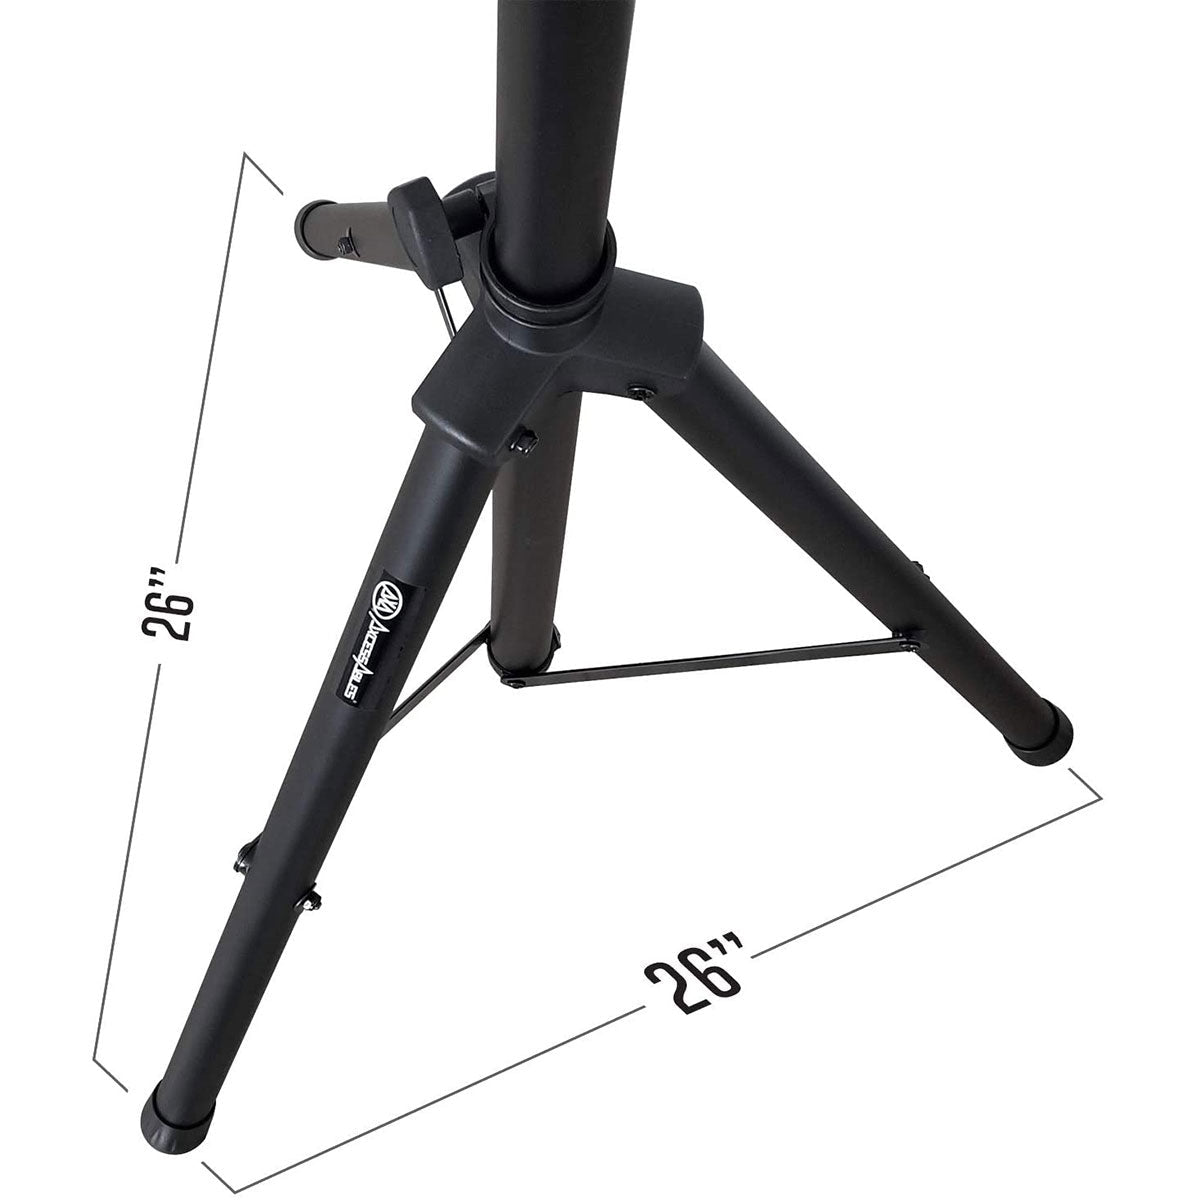 AxcessAbles Heavy-Duty DJ Tripod Stands (Pair) with Bag | Adjustable Height 42-inch to 72-inch PA Speaker Stands| 15lb Portable PA Stands Compatible with Powered Speakers (SSB-101)